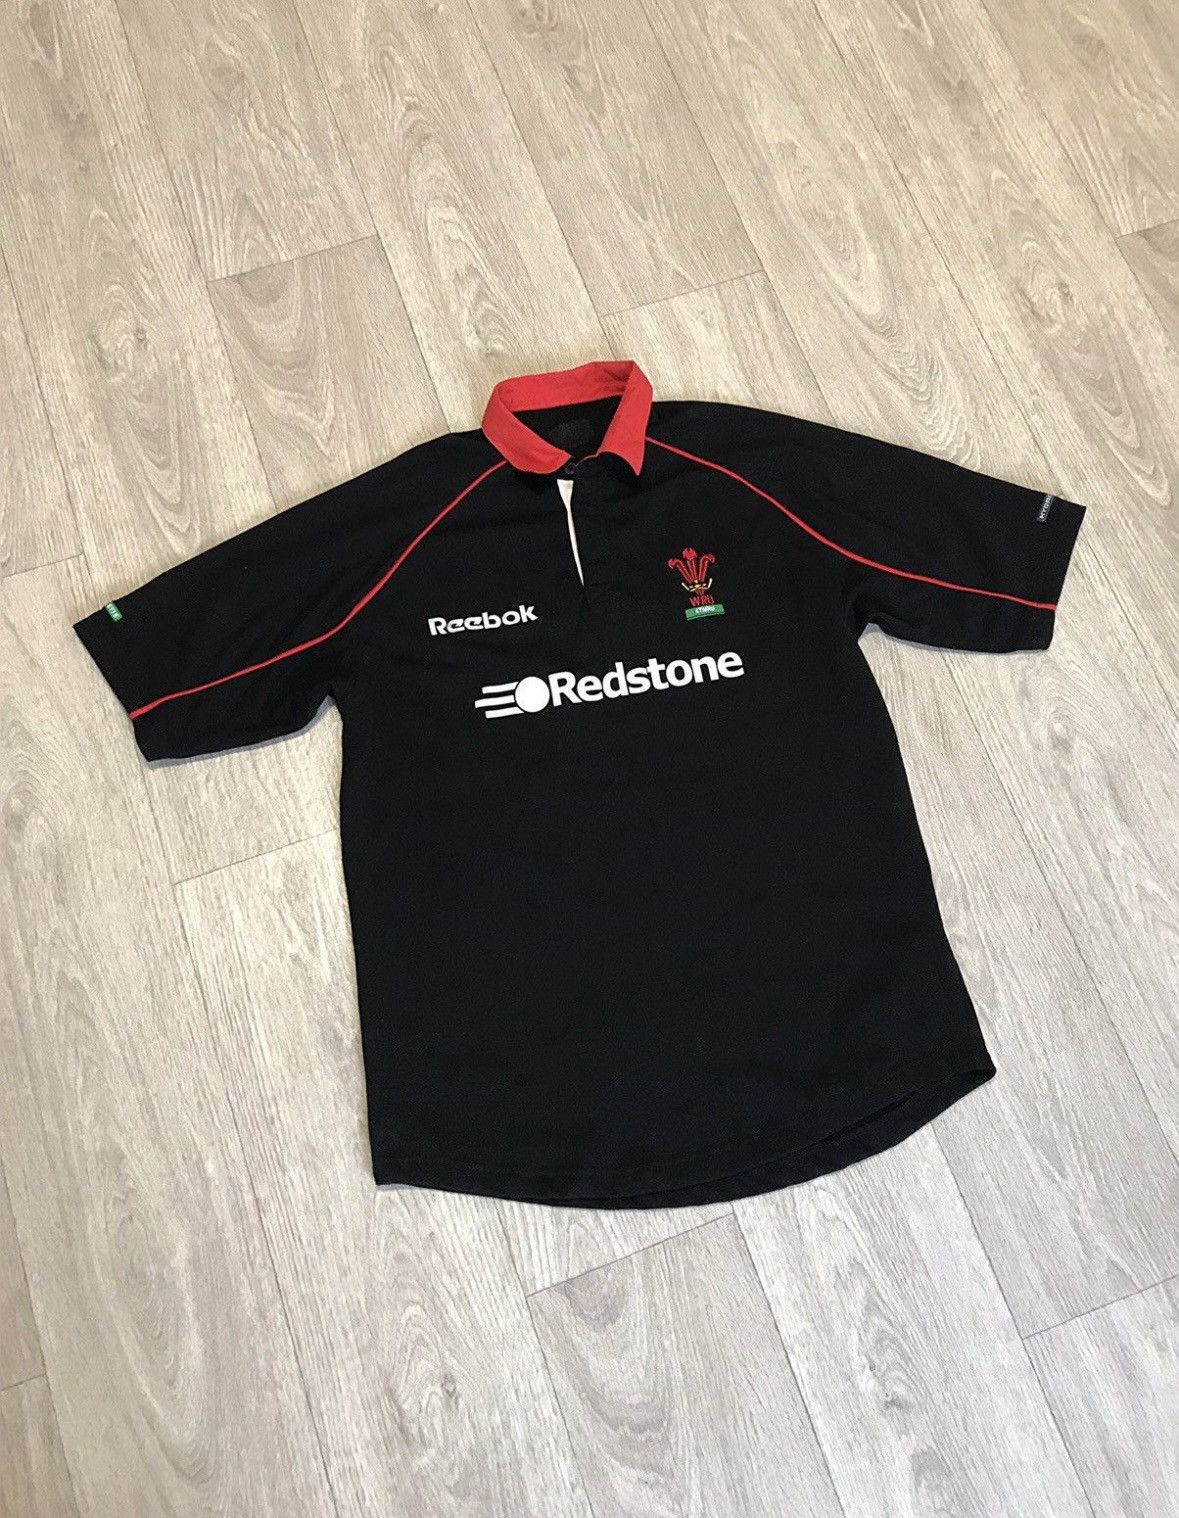 Pre-owned England Rugby League X Vintage Reebok Wales Rugby Shirt Jersey 2000/01 In Black